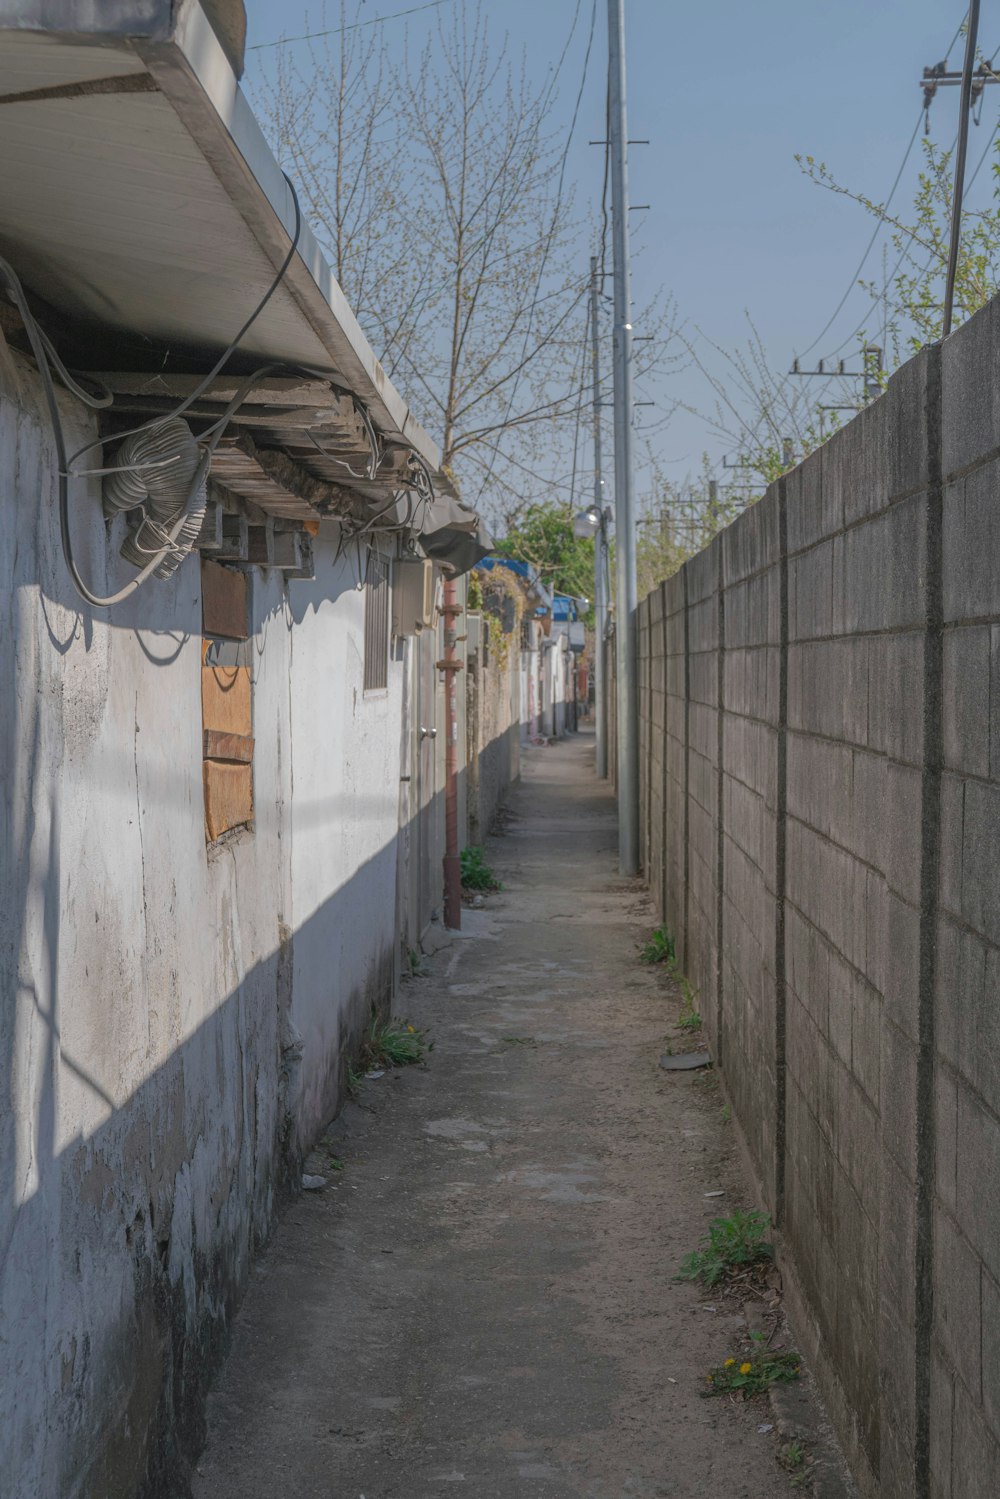 a narrow alley way with a telephone pole in the distance